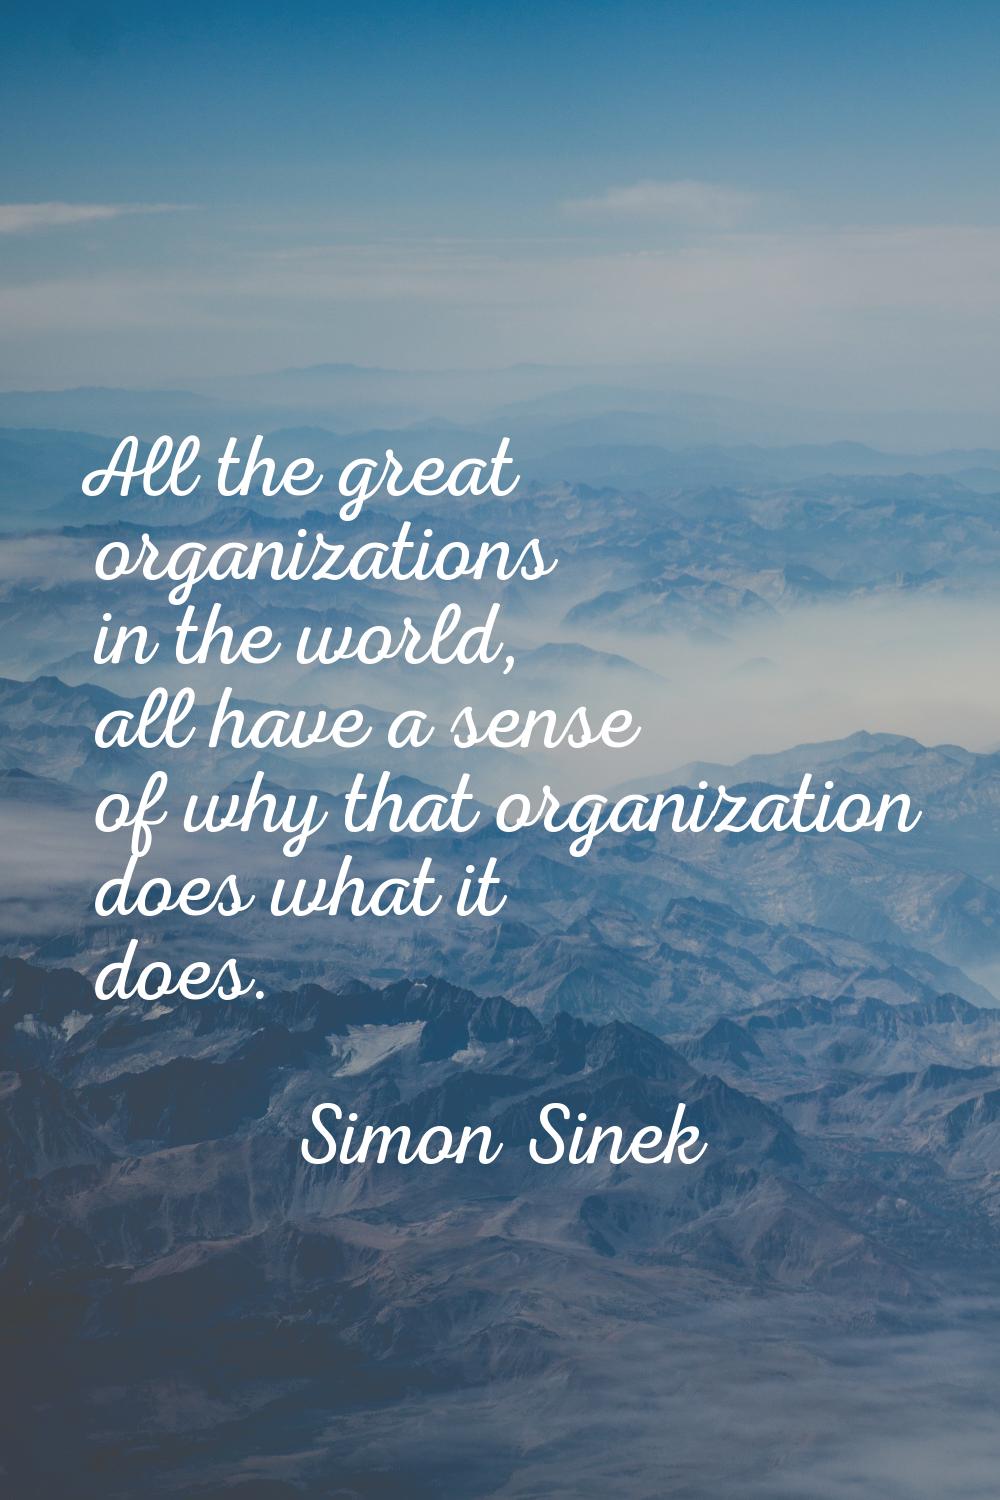 All the great organizations in the world, all have a sense of why that organization does what it do